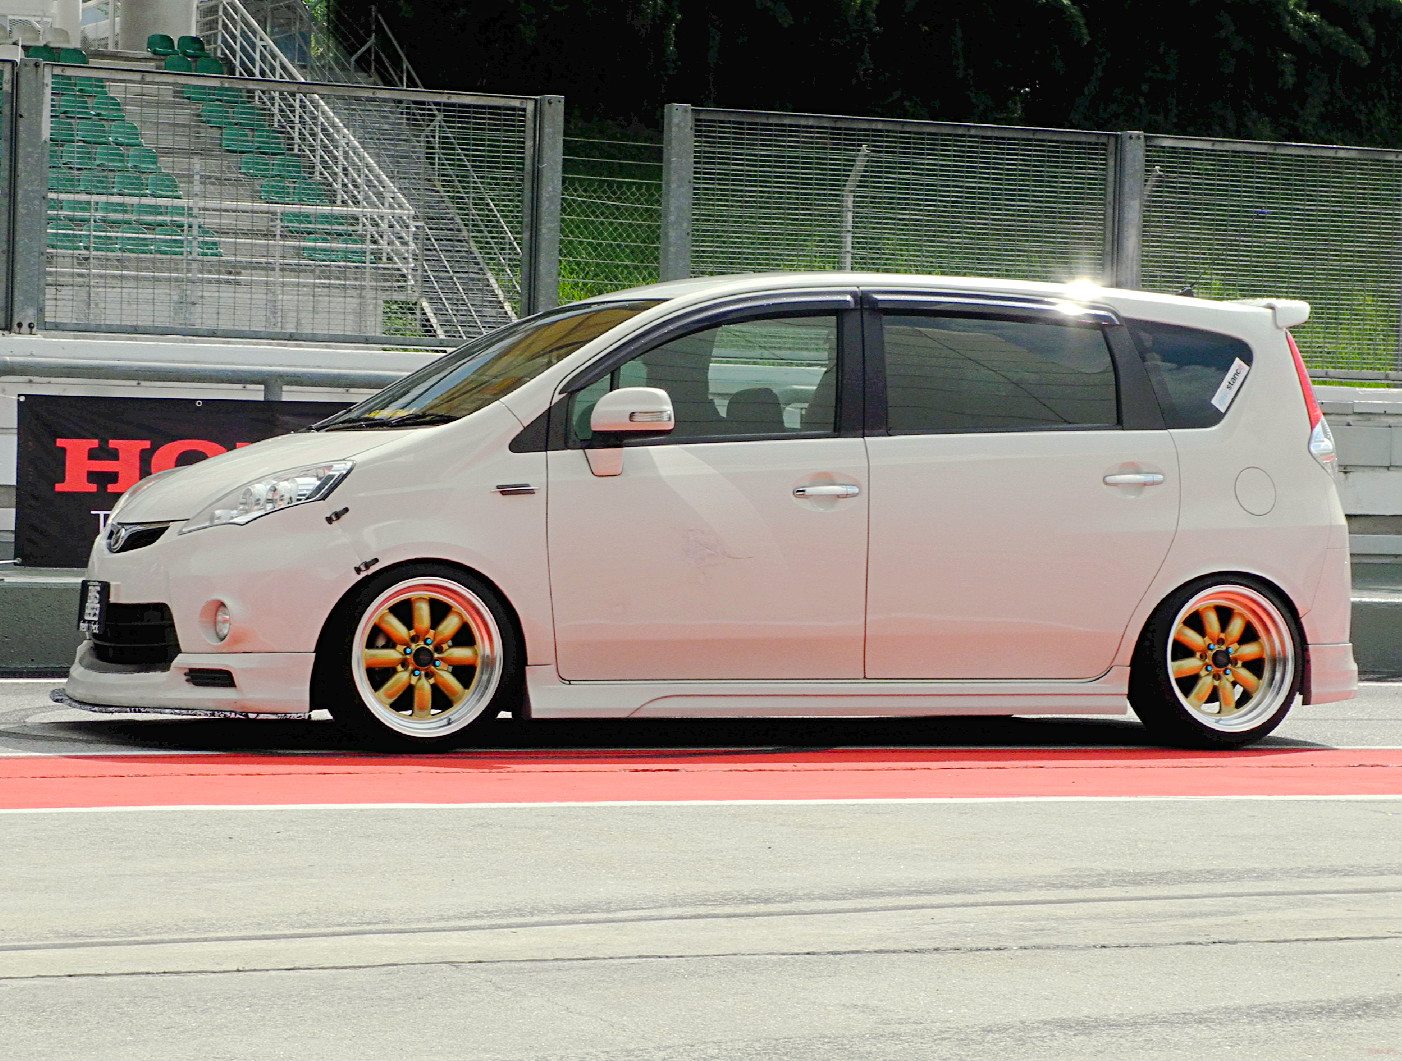 Stance Static!: Epicstance 2012